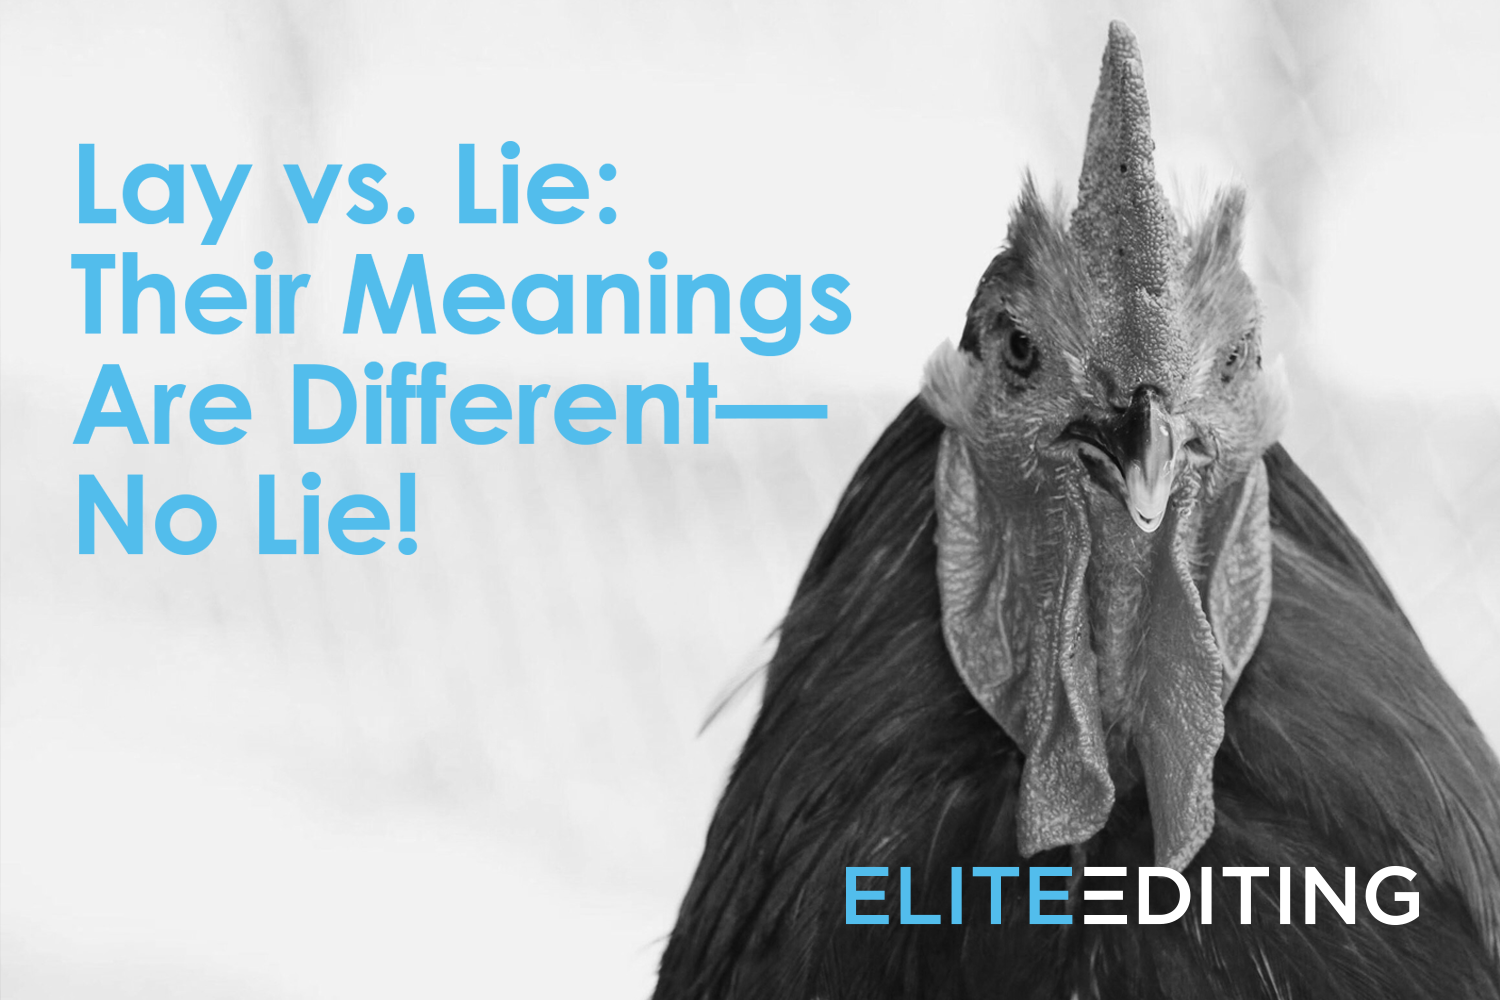 Lie meaning